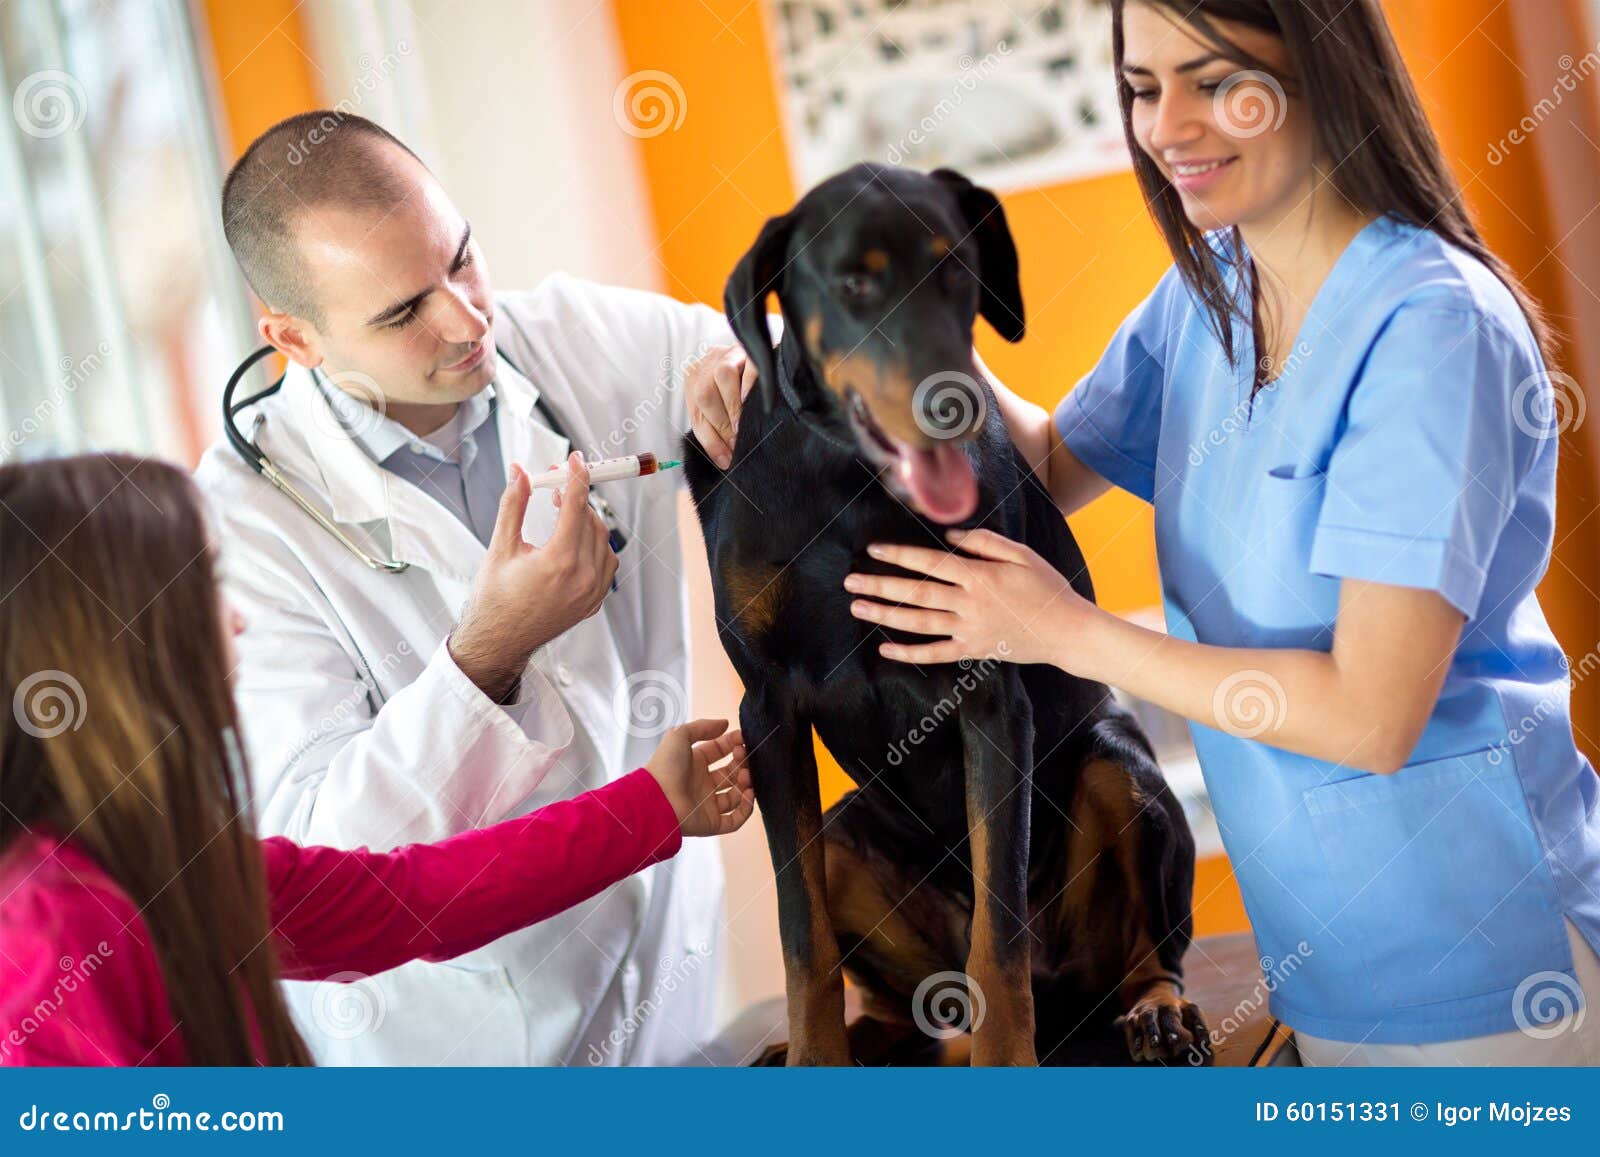 veterinarians curing great done dog in vet clinic